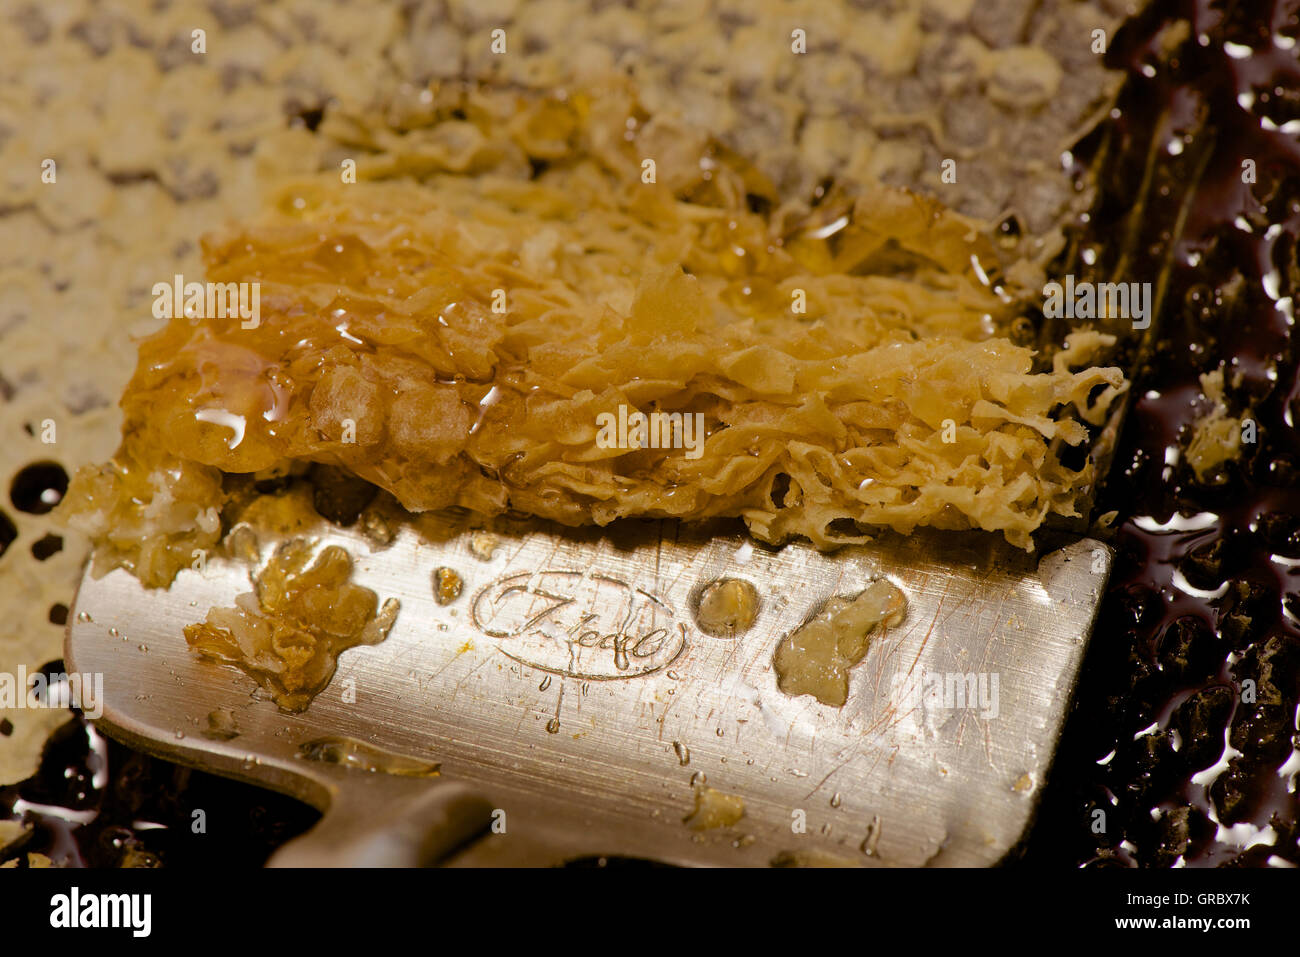 Uncapping The Cells Of A Honeycomb With An Uncapping Fork Stock Photo